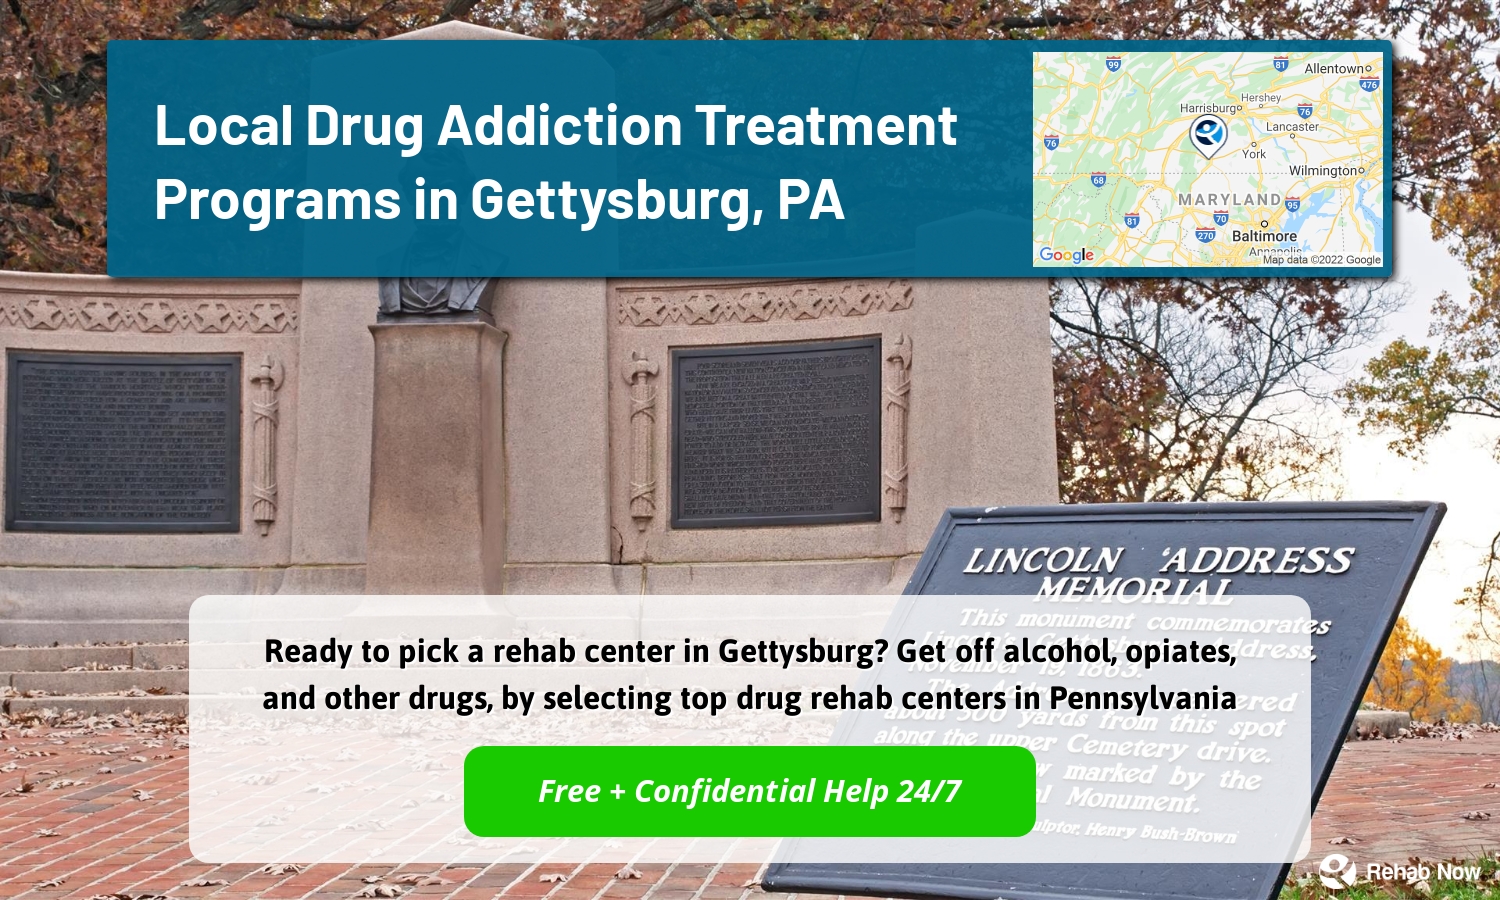 Ready to pick a rehab center in Gettysburg? Get off alcohol, opiates, and other drugs, by selecting top drug rehab centers in Pennsylvania